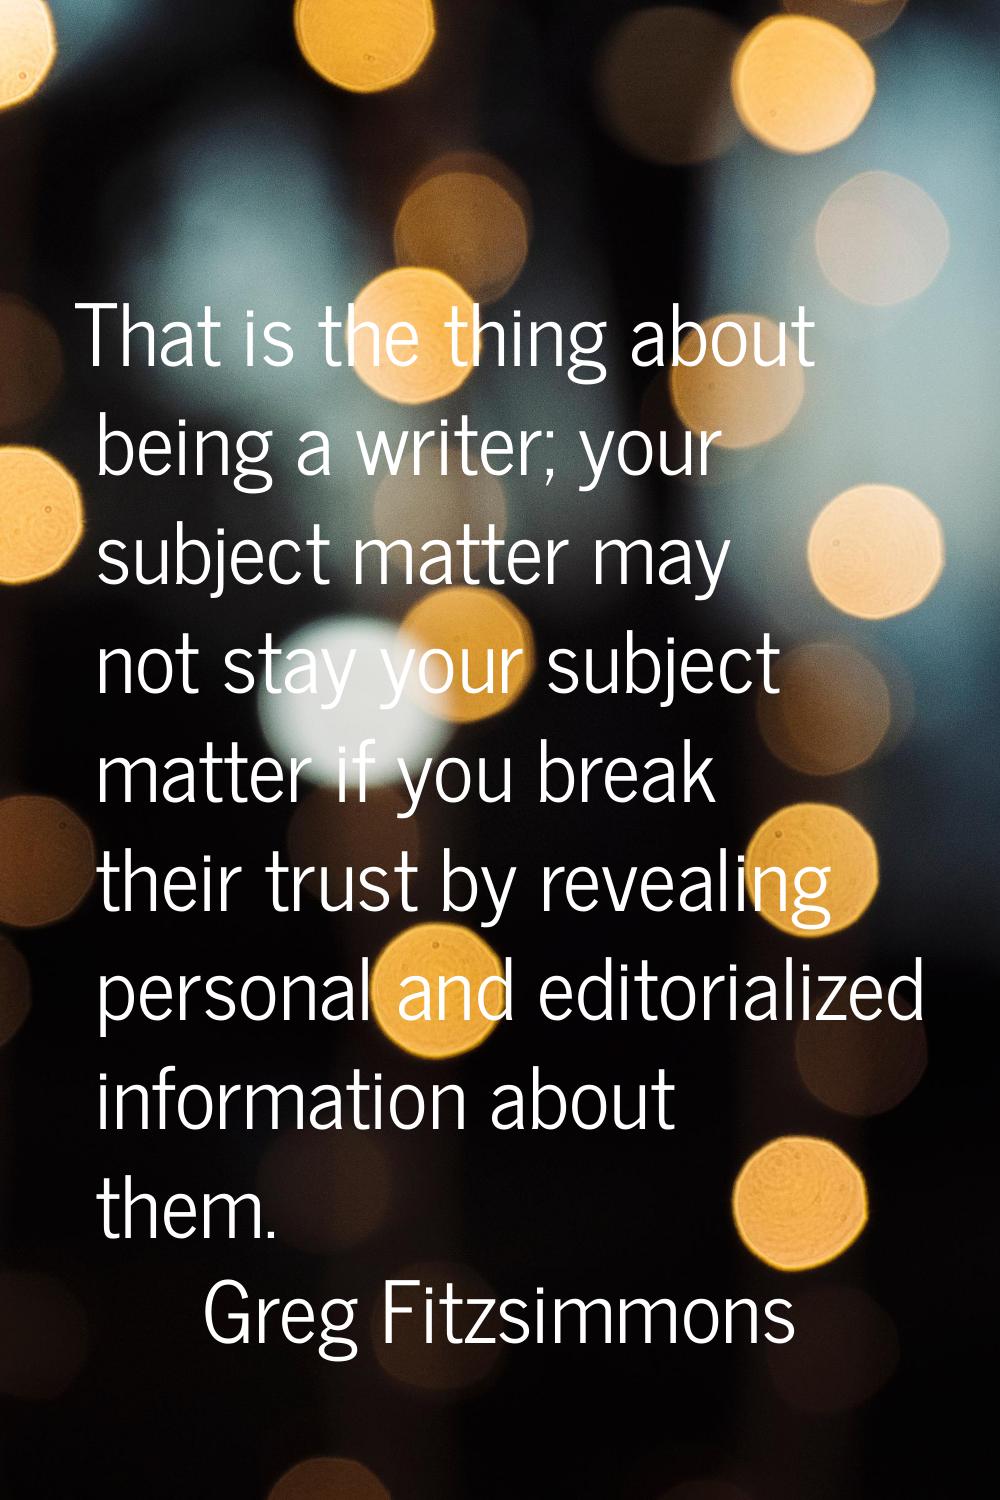 That is the thing about being a writer; your subject matter may not stay your subject matter if you